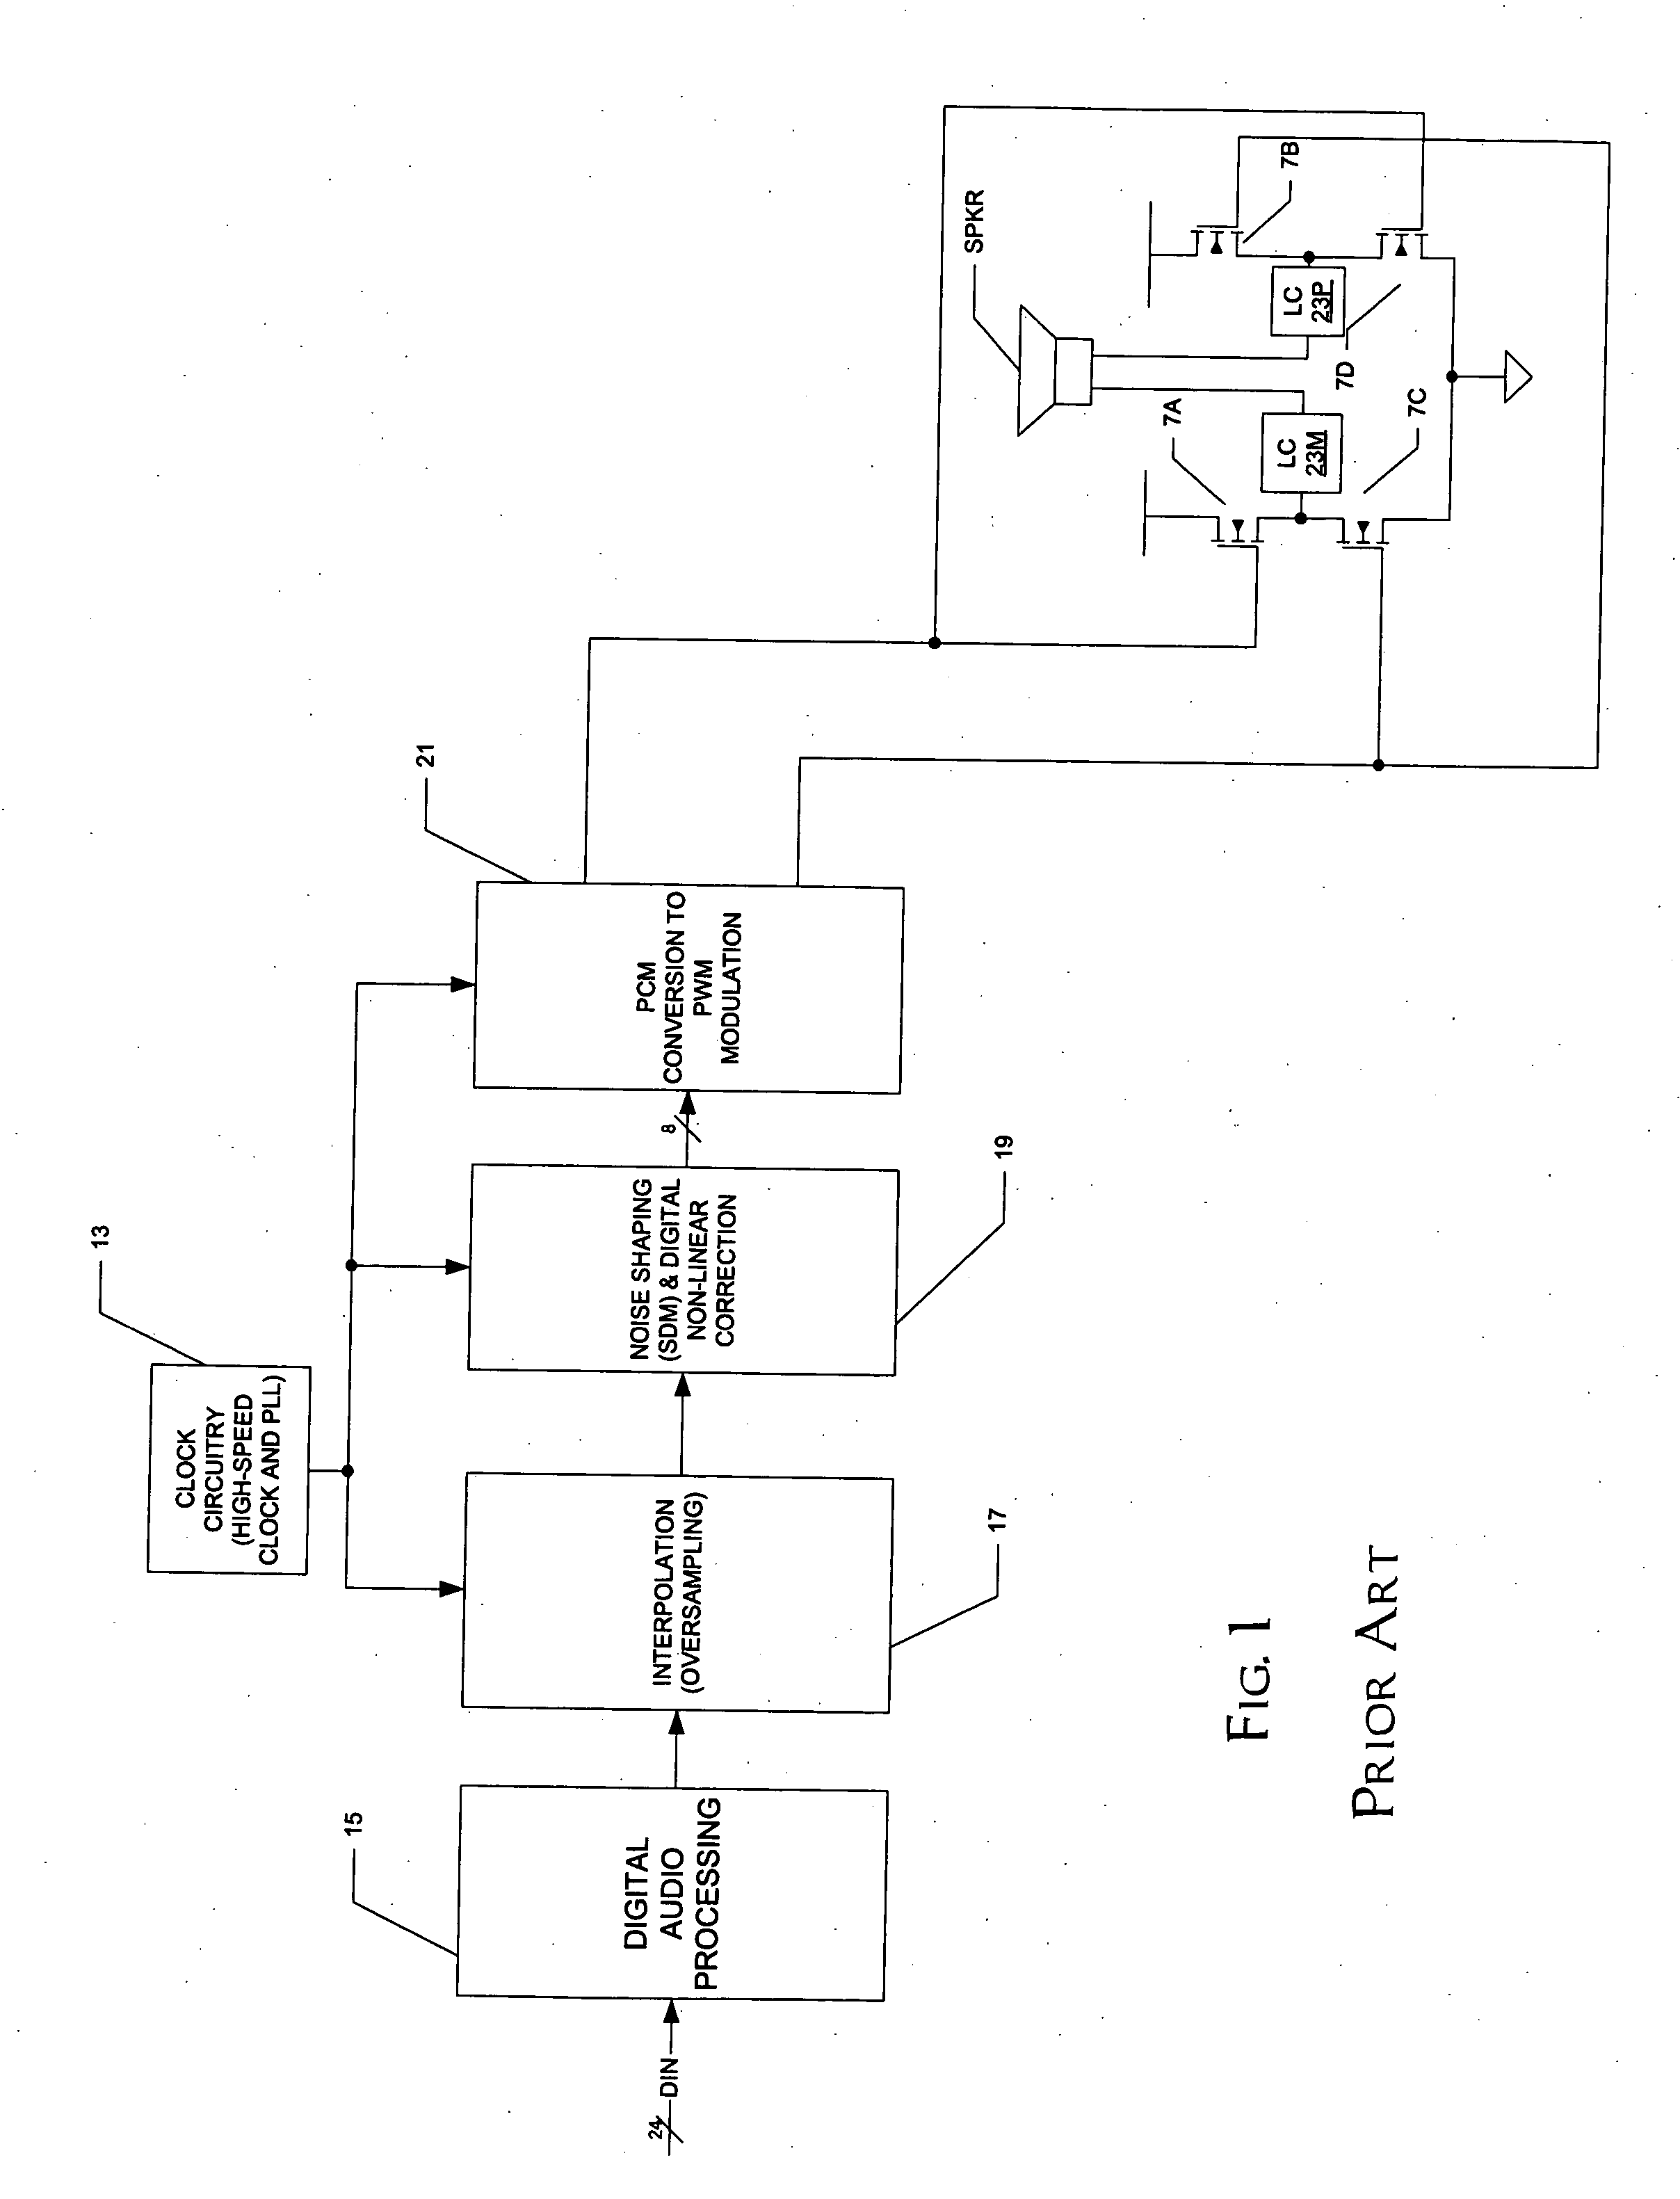 On-the-fly introduction of inter-channel delay in a pulse-width-modulation amplifier